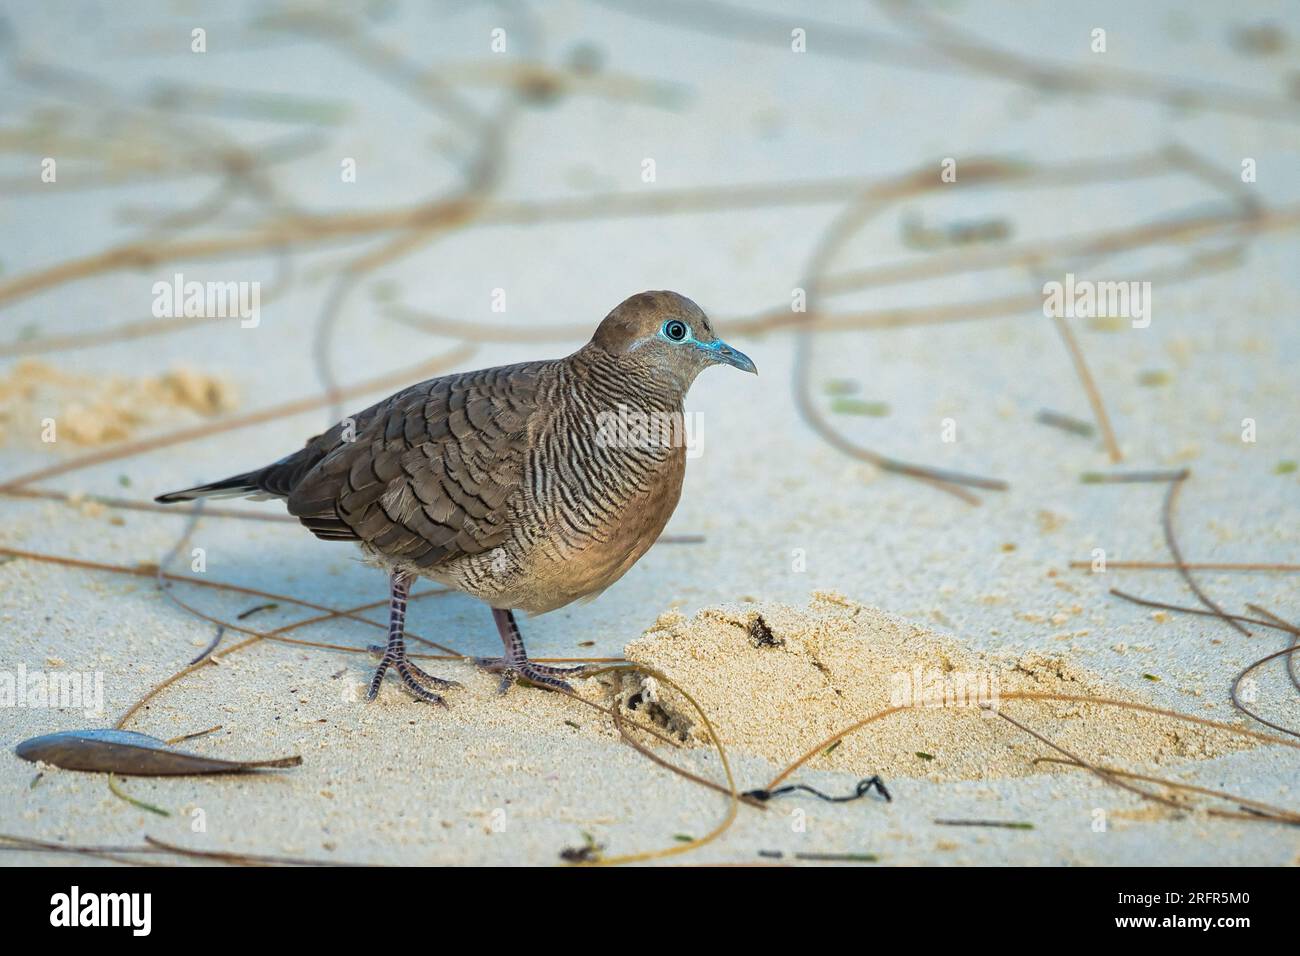 The Barred Ground Dove or Zebra Dove on the white sandy beach looking for food, Mahe Seychelles Stock Photo